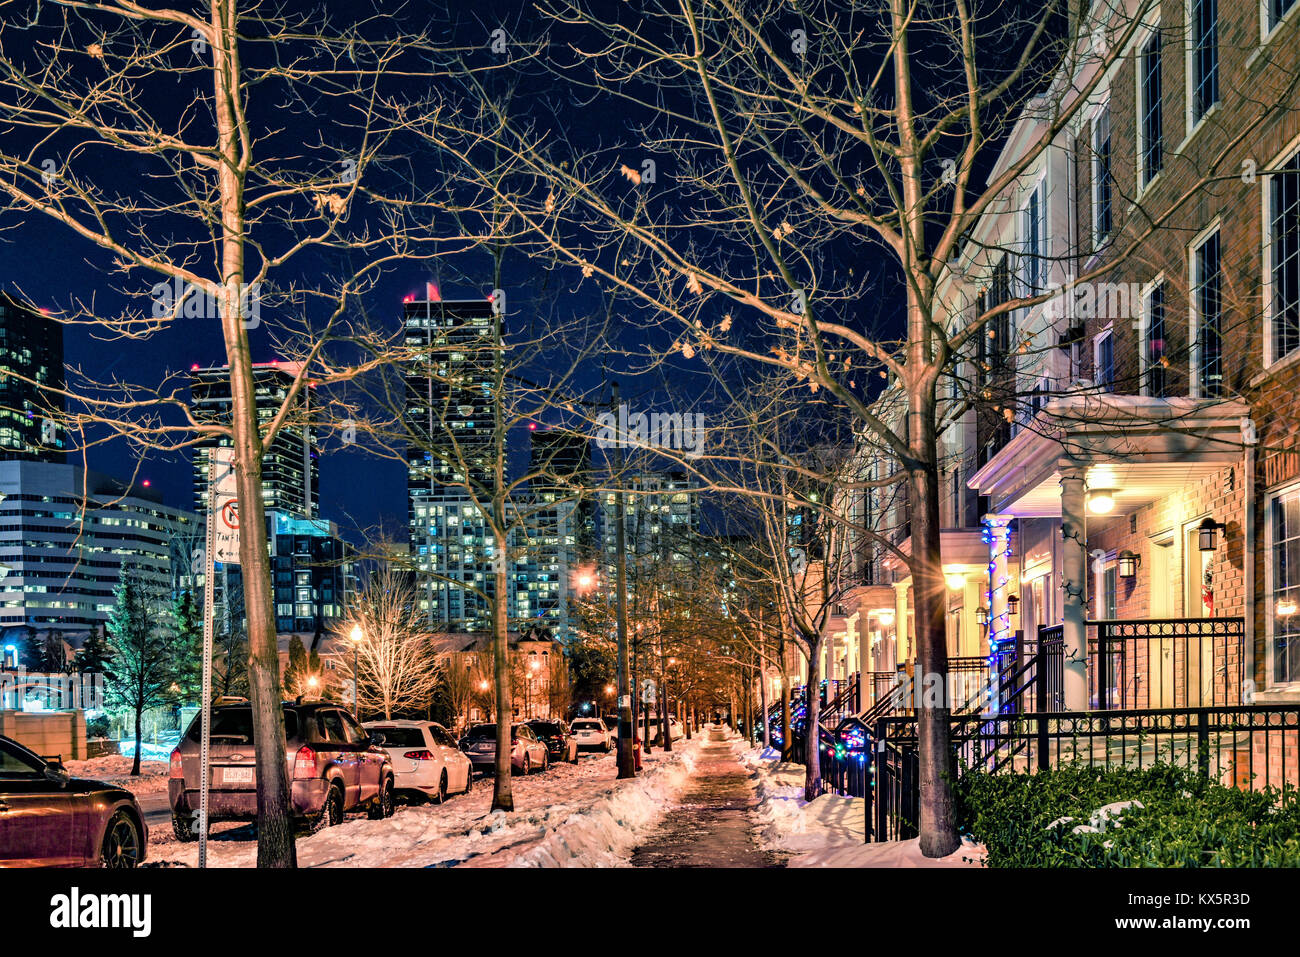 Night shot of a neighborhood in North York, Toronto, with snow and Christmas decoration Stock Photo